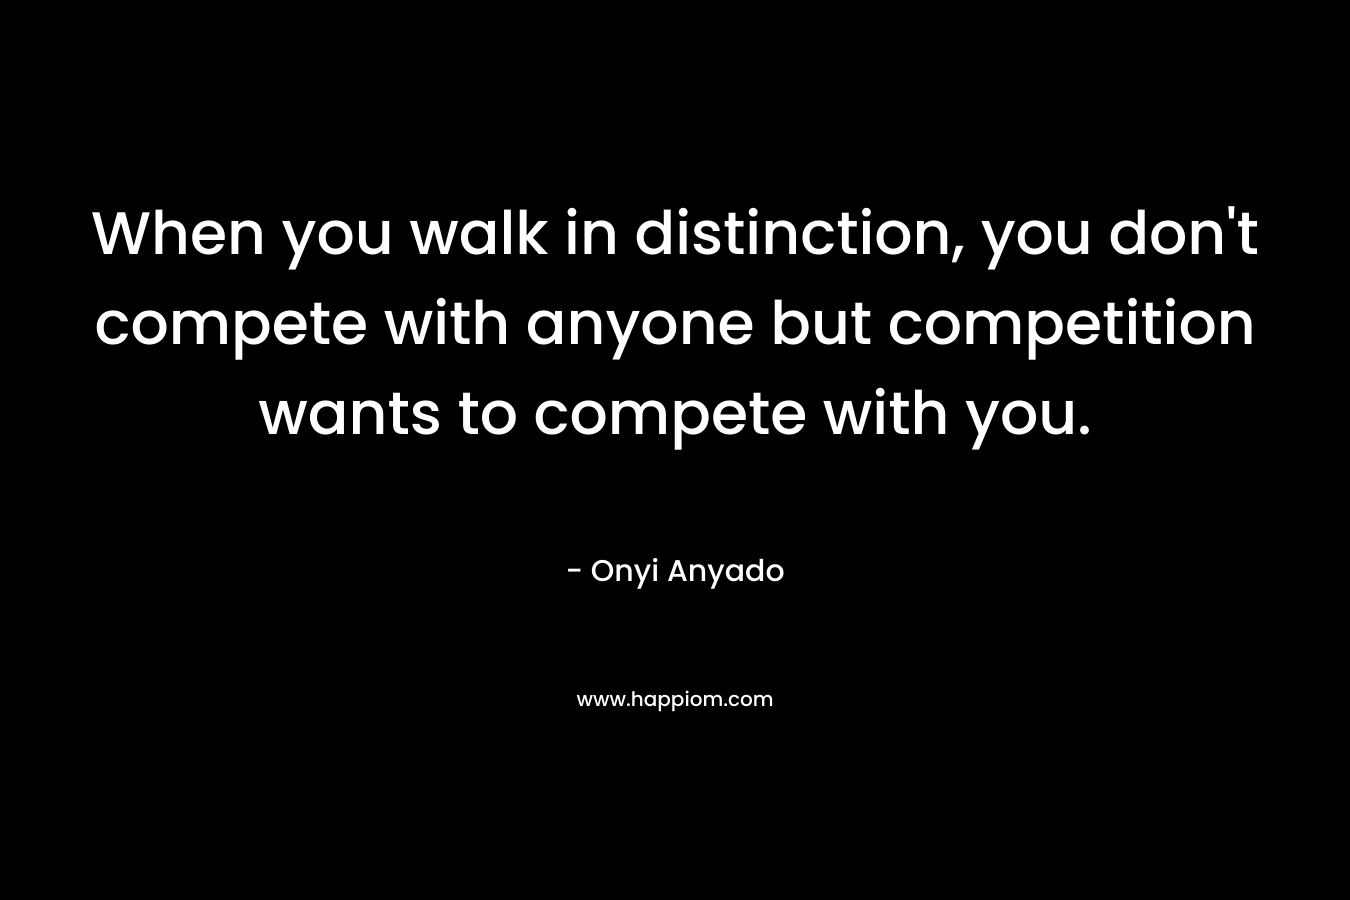 When you walk in distinction, you don't compete with anyone but competition wants to compete with you.